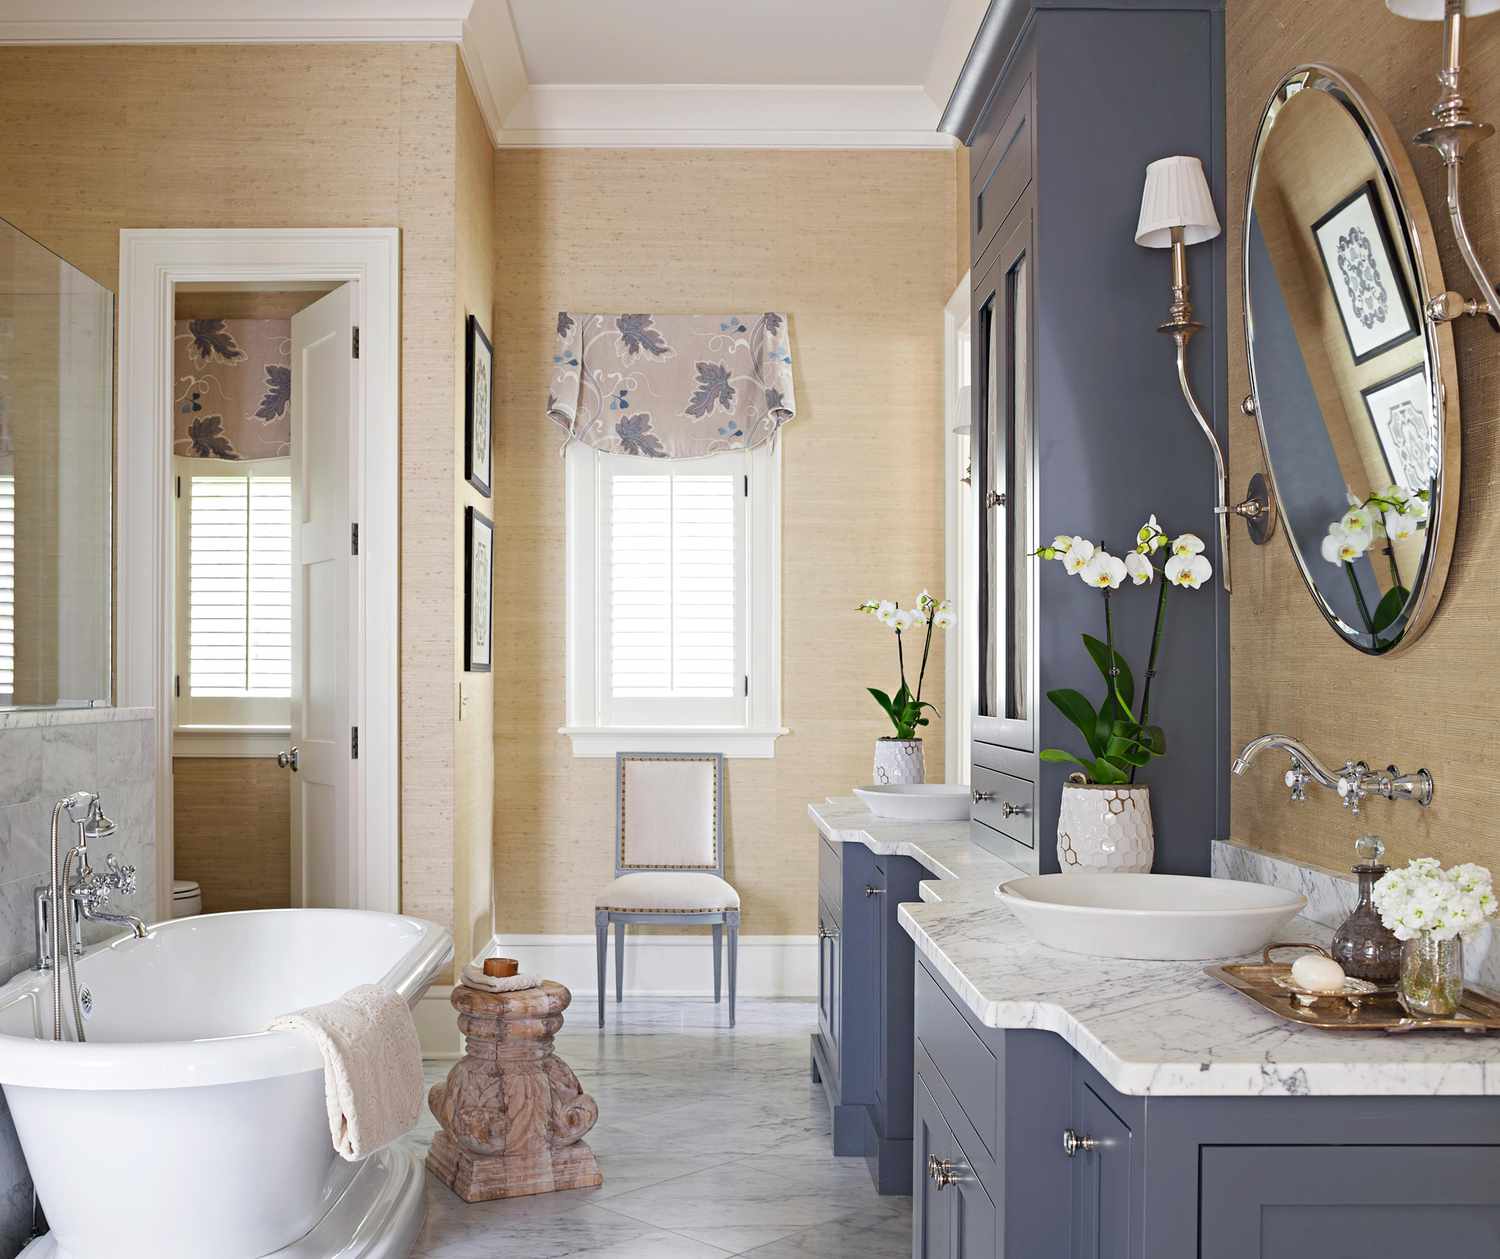 16 Beige Bathroom Ideas for a Relaxing, Spa-Worthy Escape ...